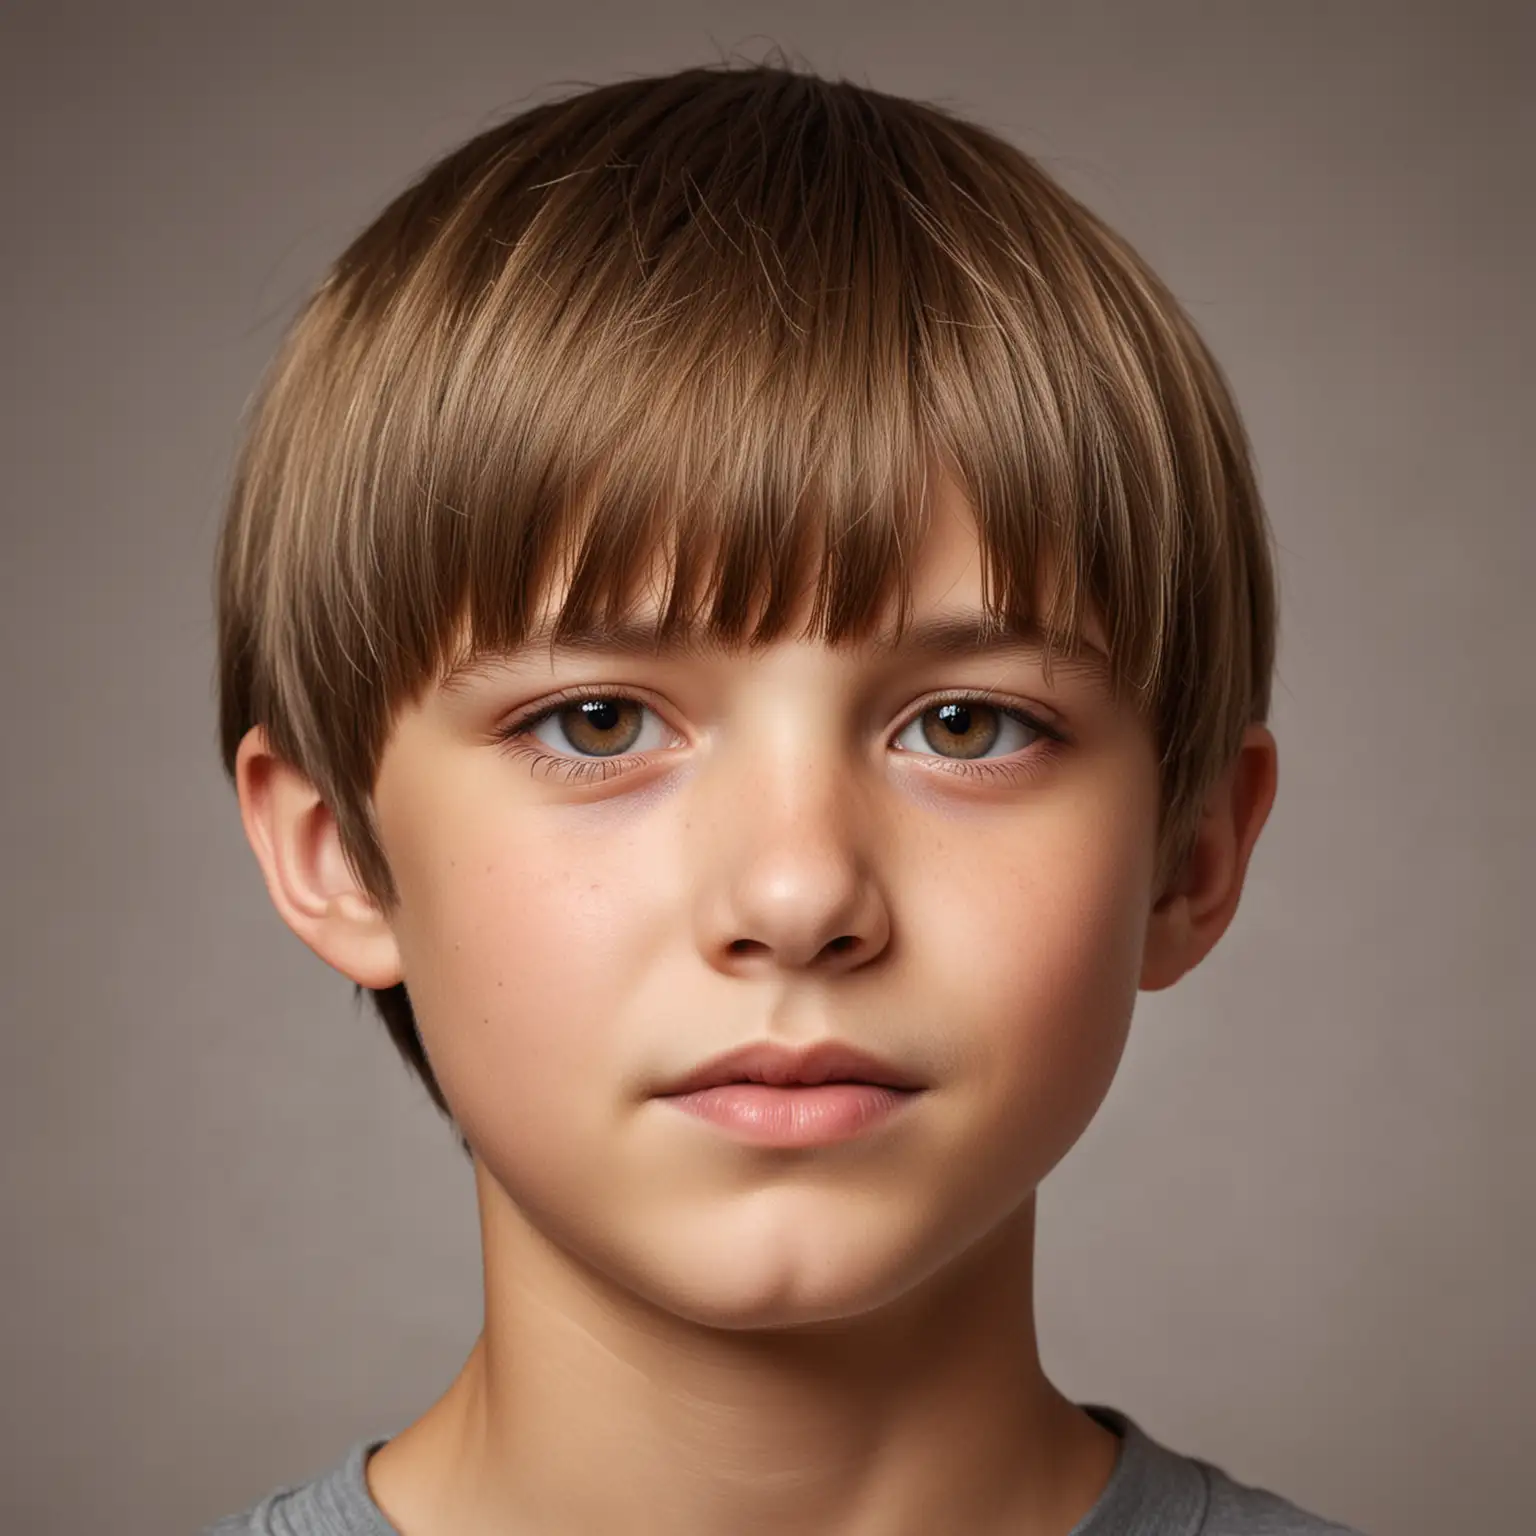 Portrait of Eleven Year Old Boy with Soft Light Brown Hair